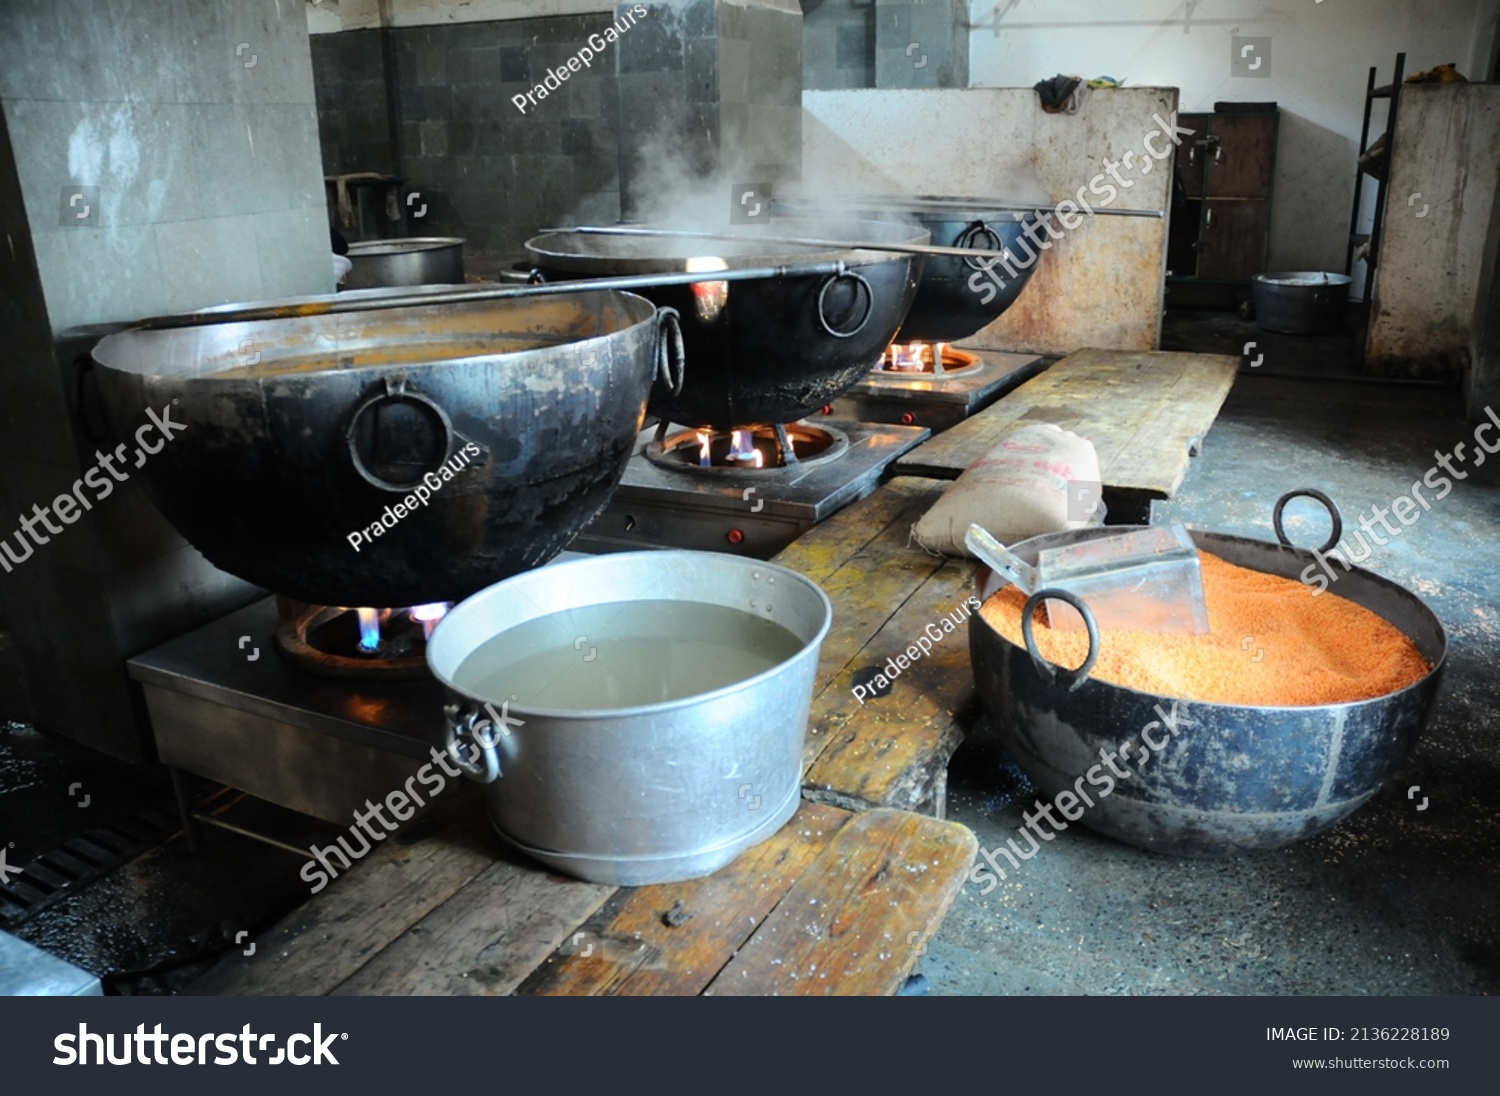 Stock Photo Amritsar Punjab India Sep Food Prepare At Community Kitchen Of The Golden Temple S 2136228189 